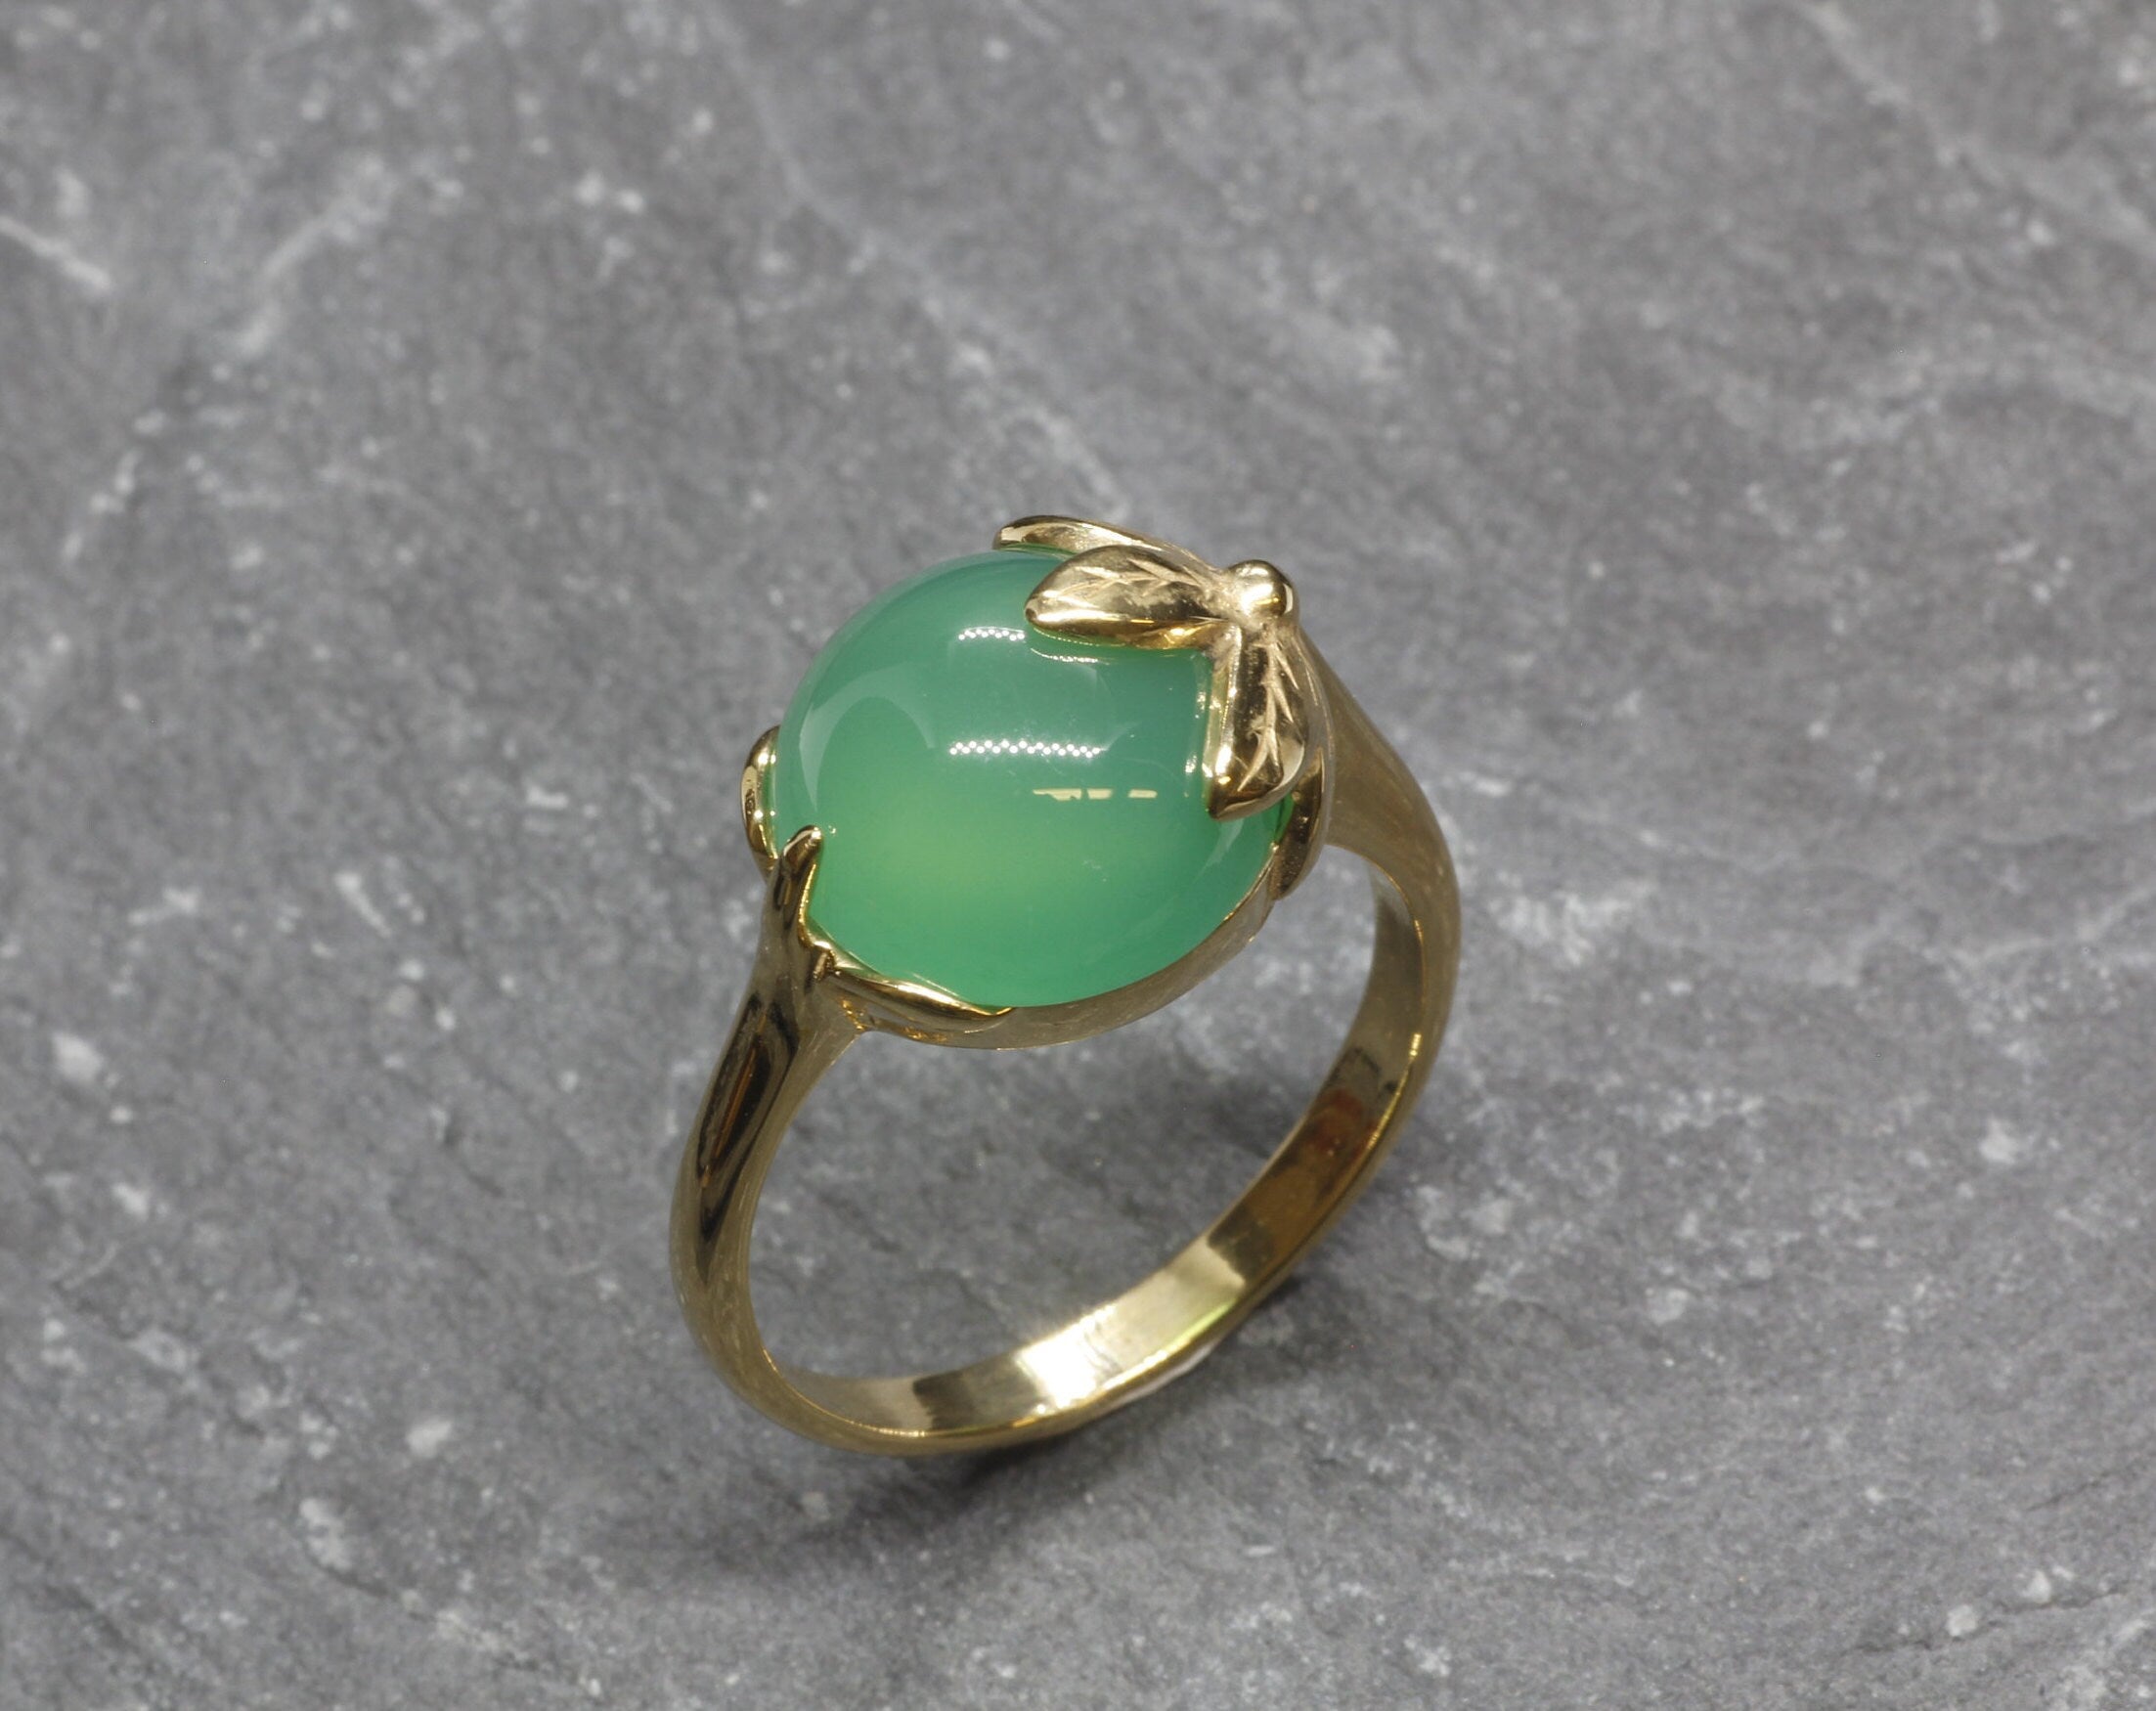 Gold Emerald Ring, Created Emerald, Green Flower Ring, Gold Plated Ring, Leaf Ring, Vintage Ring, Gold Leaf Ring, Antique Ring, Vermeil Ring